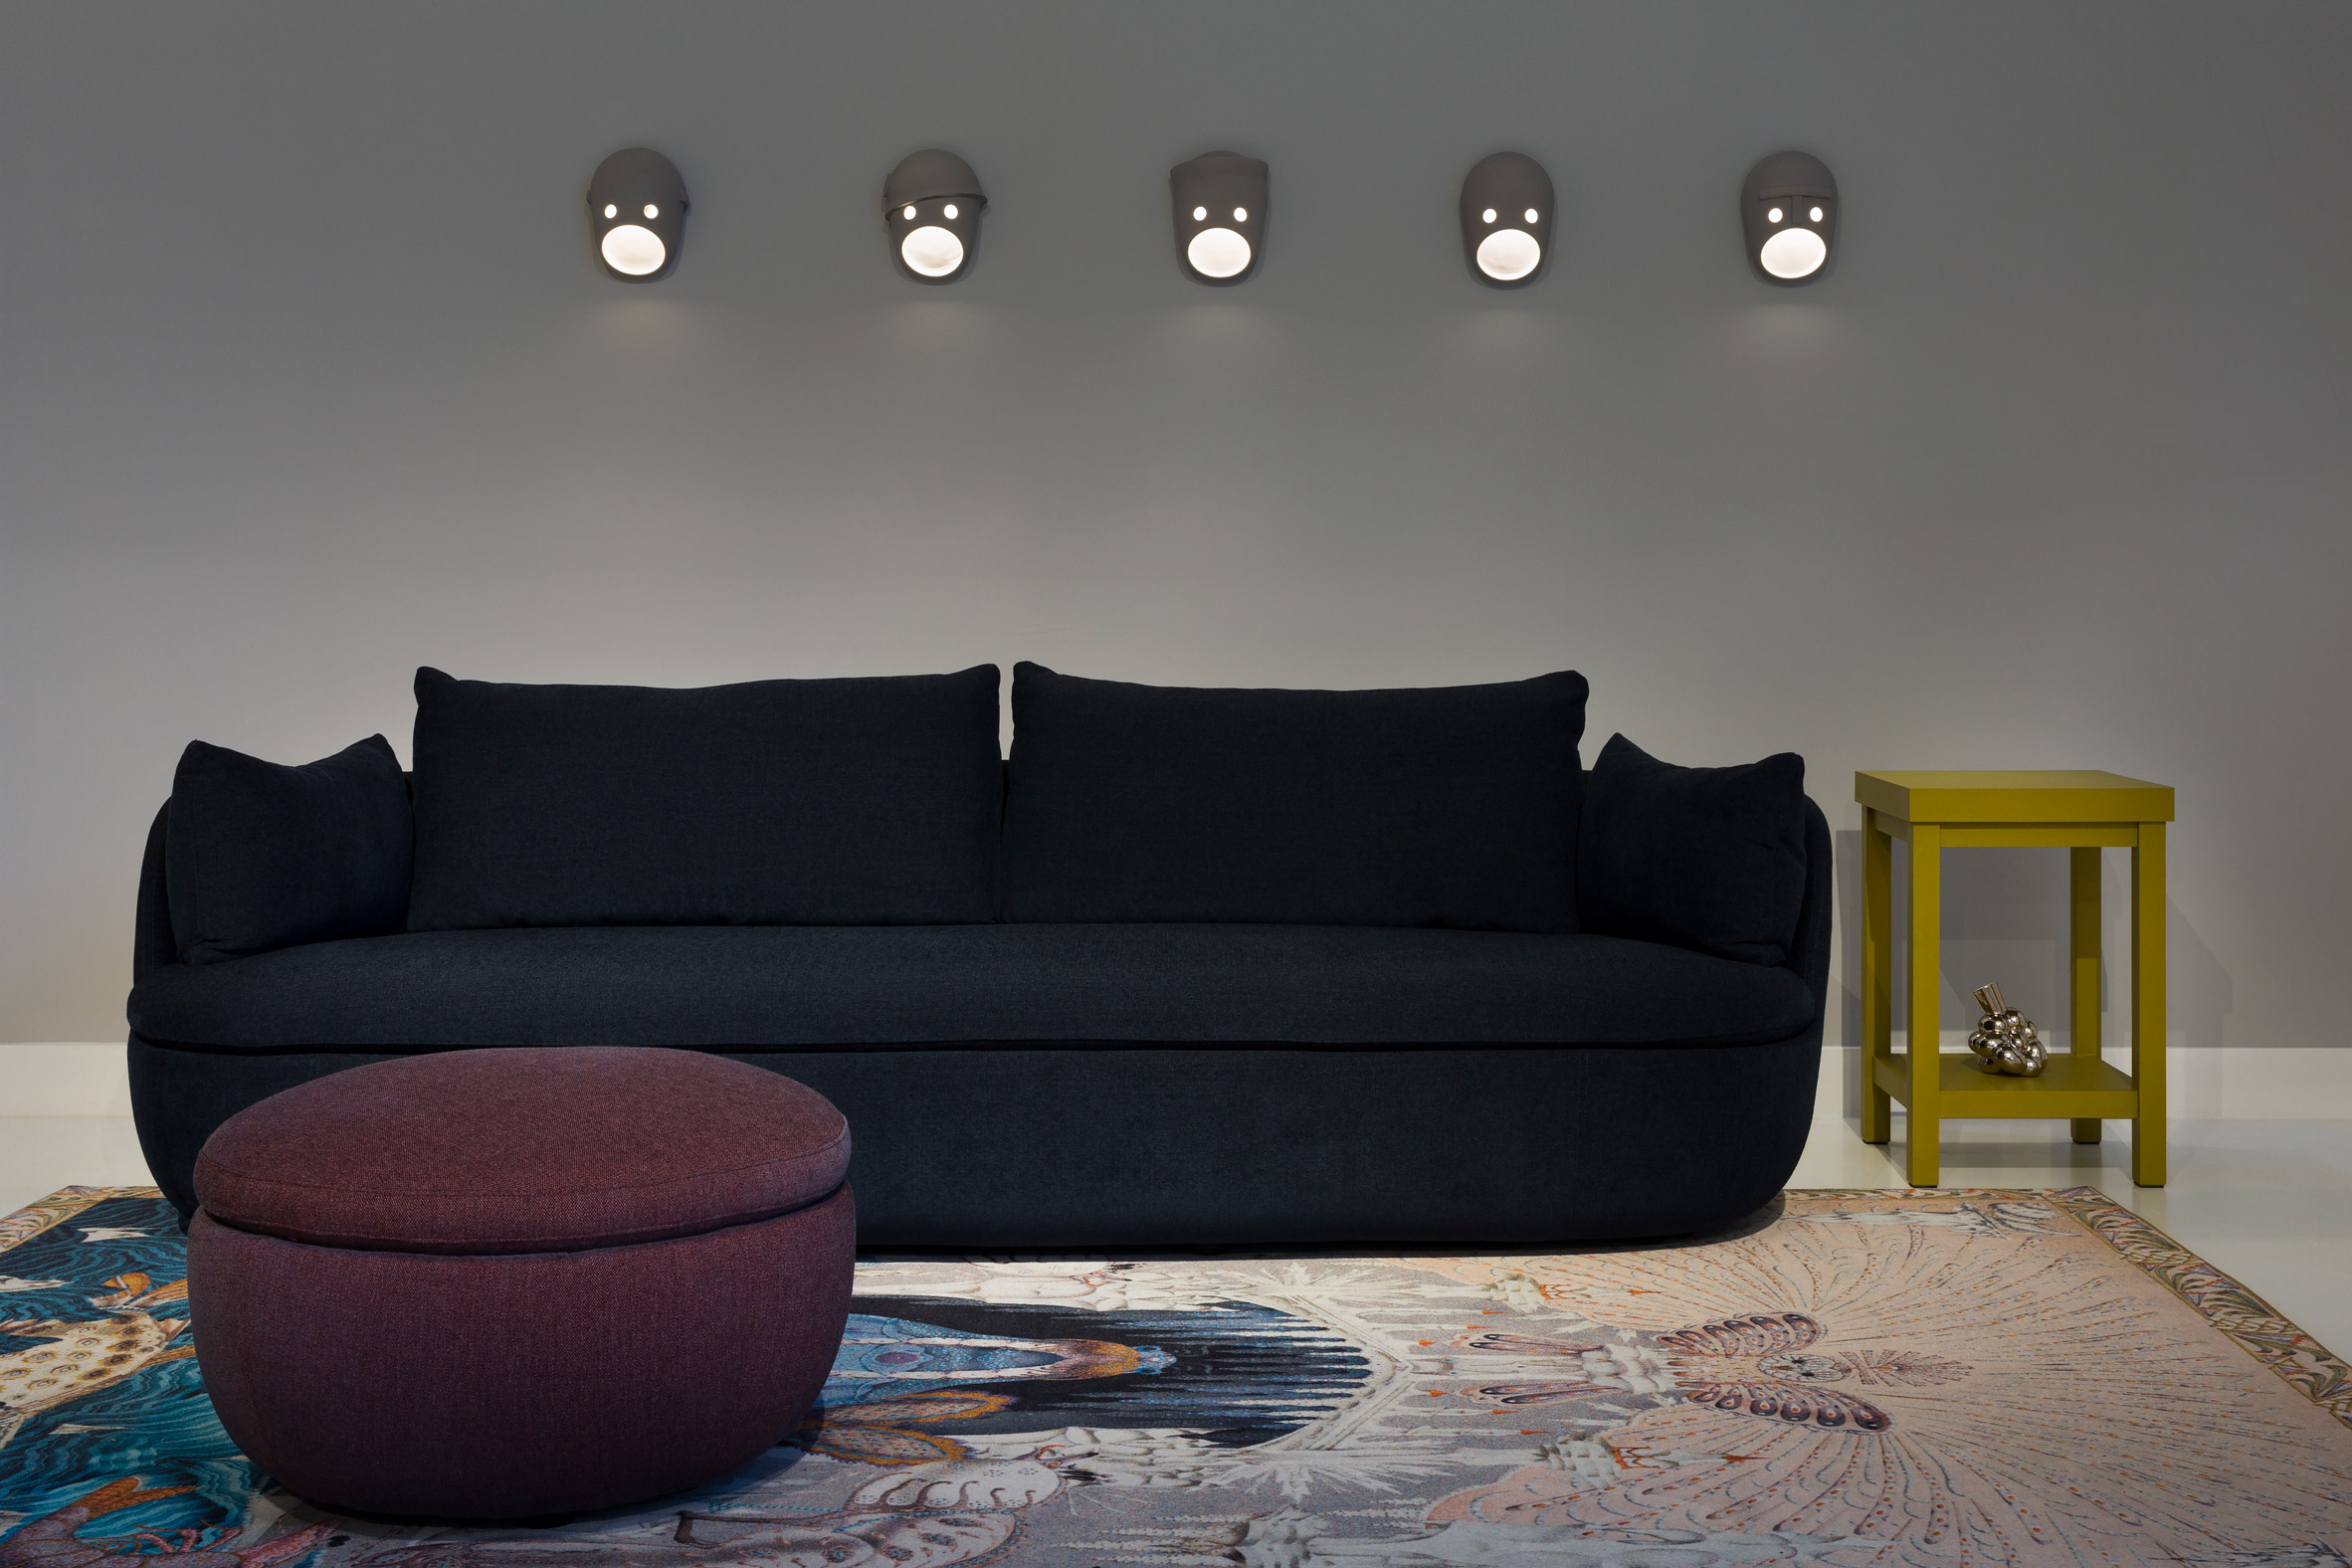 The Party is a collection of wall-mounted lamps by Kranen/Gille for Moooi